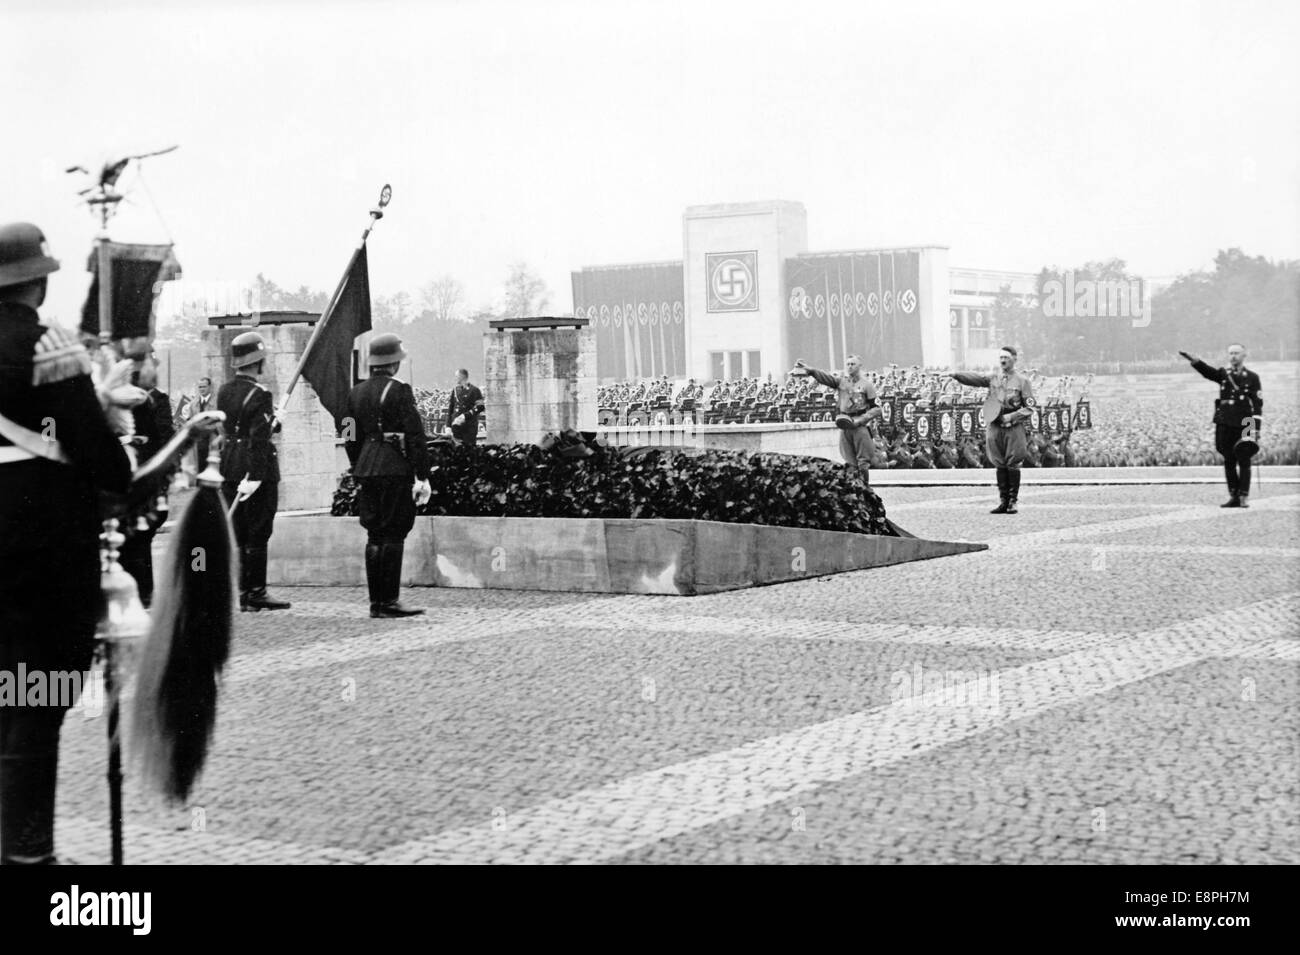 Nuremberg Rally 1937 in Nuremberg, Germany - Nazi party rally grounds - Adolf Hitler, commander of the Sturmabteilung (SA) Viktor Lutze (L) and Reichsfuehrer of the Schutzstaffel (SS) Heinrich Himmler (R) attend the commemoration of the 'heroes', who fell in the failed Beer Hall Putsch in 1923 in front of the 'Hall of Honour' during the roll call of the Sturmabteilung (SA), Schutzstaffel (SS), National Socialist Motor Corps (NSKK) and National Socialist Flyers Corps (NSFK). Luitpold Hall, which had been renovated from 1933 till 1935, is seen in the background. (Flaws in quality due to the hist Stock Photo